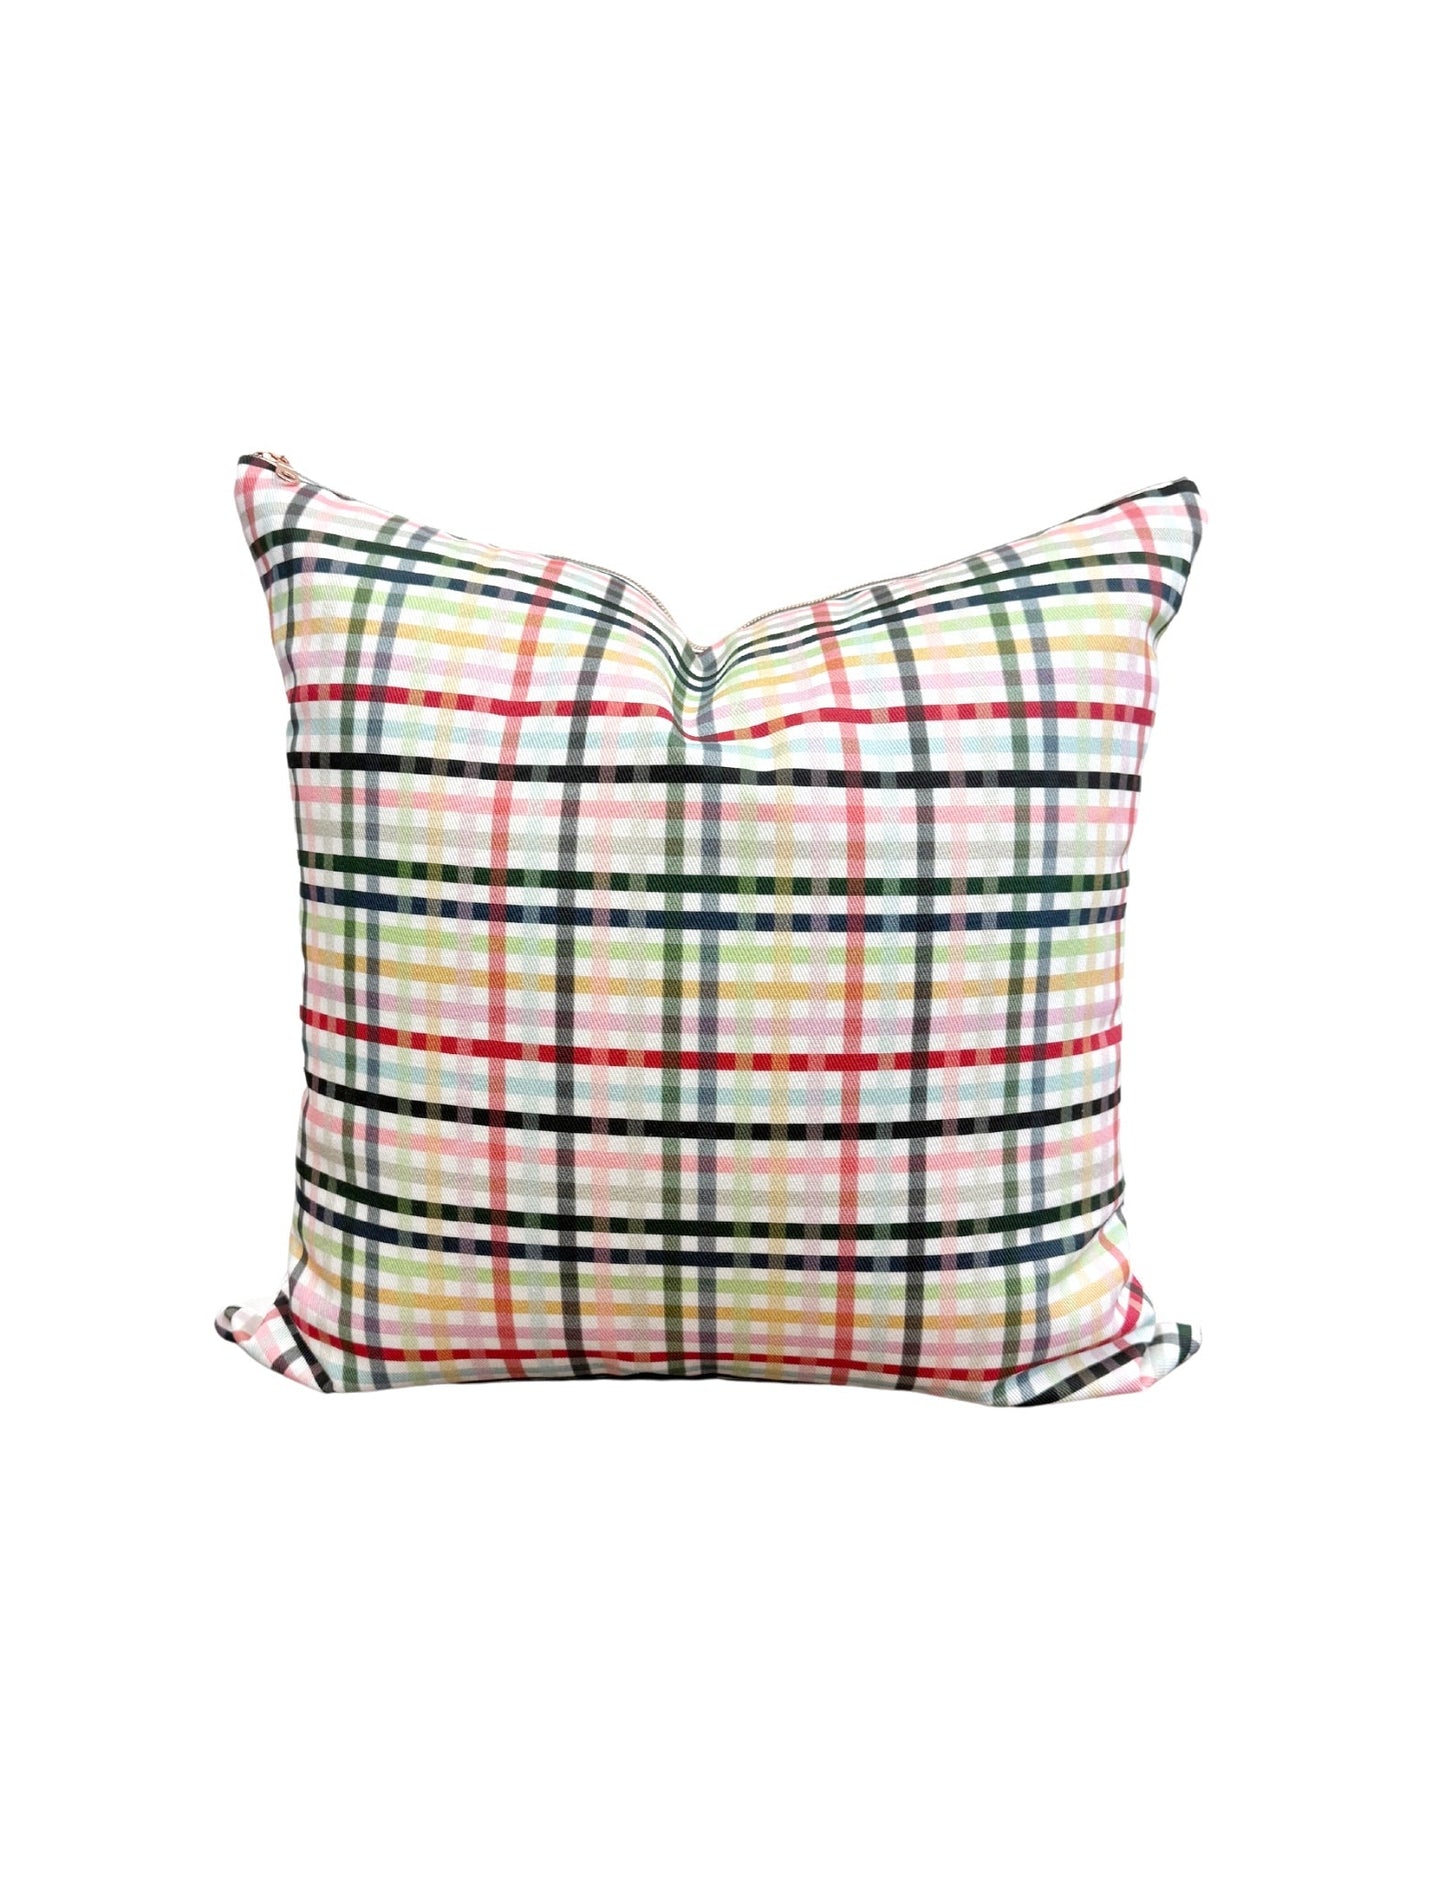 Taylor Swift - Eras Gingham + Karma is a Cat Pillow Cover + Apricot Throw